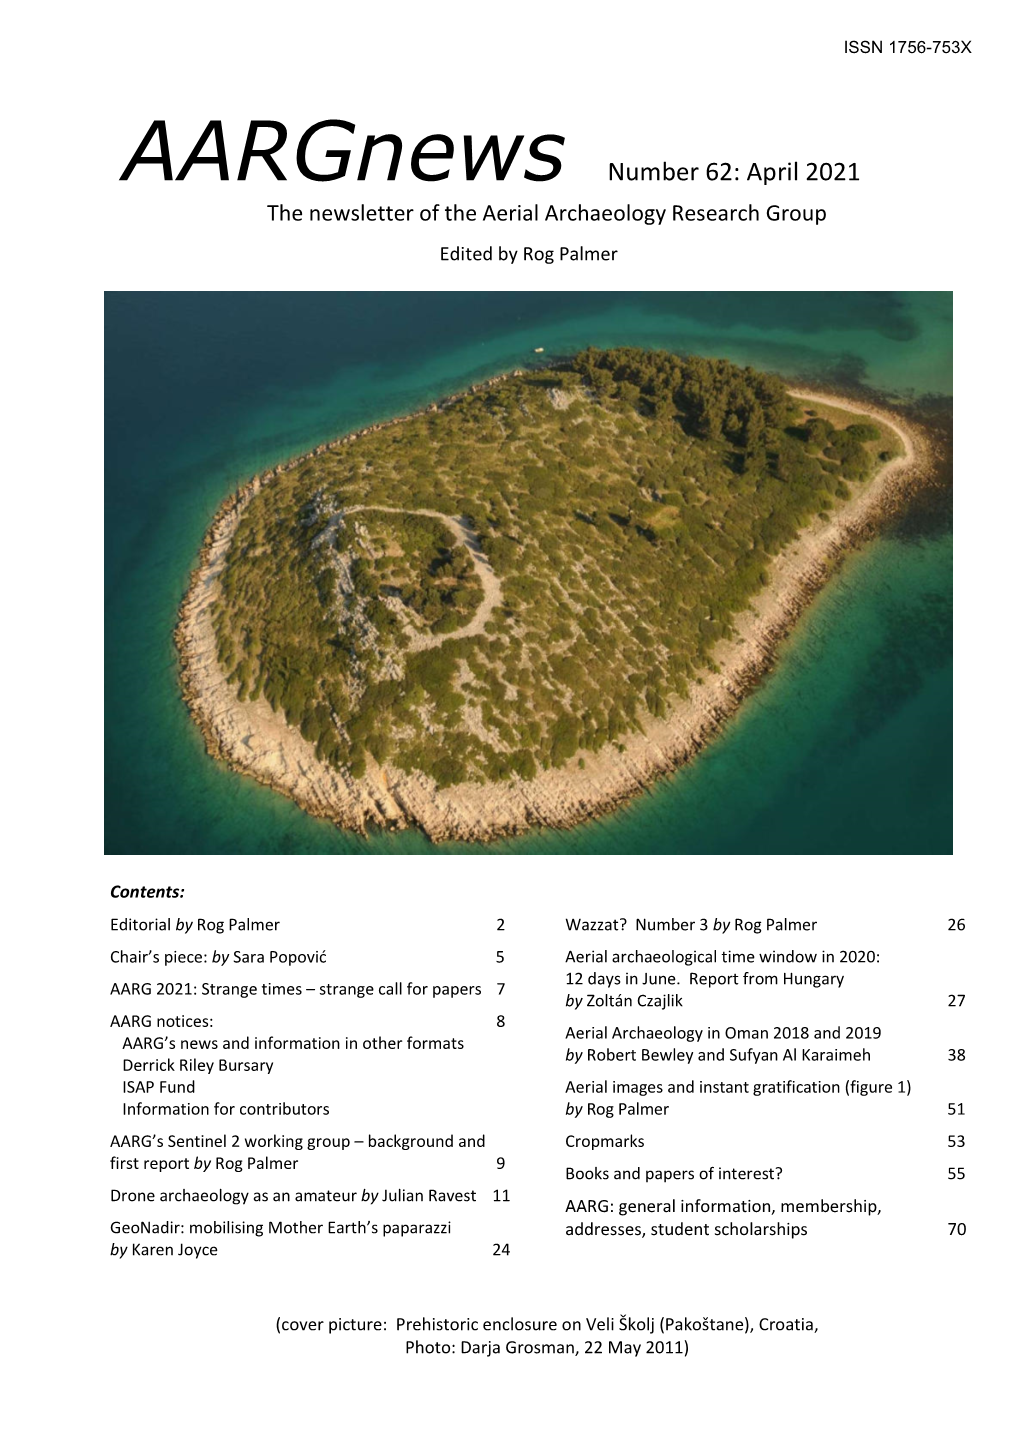 Aargnews Number 62: April 2021 the Newsletter of the Aerial Archaeology Research Group Edited by Rog Palmer